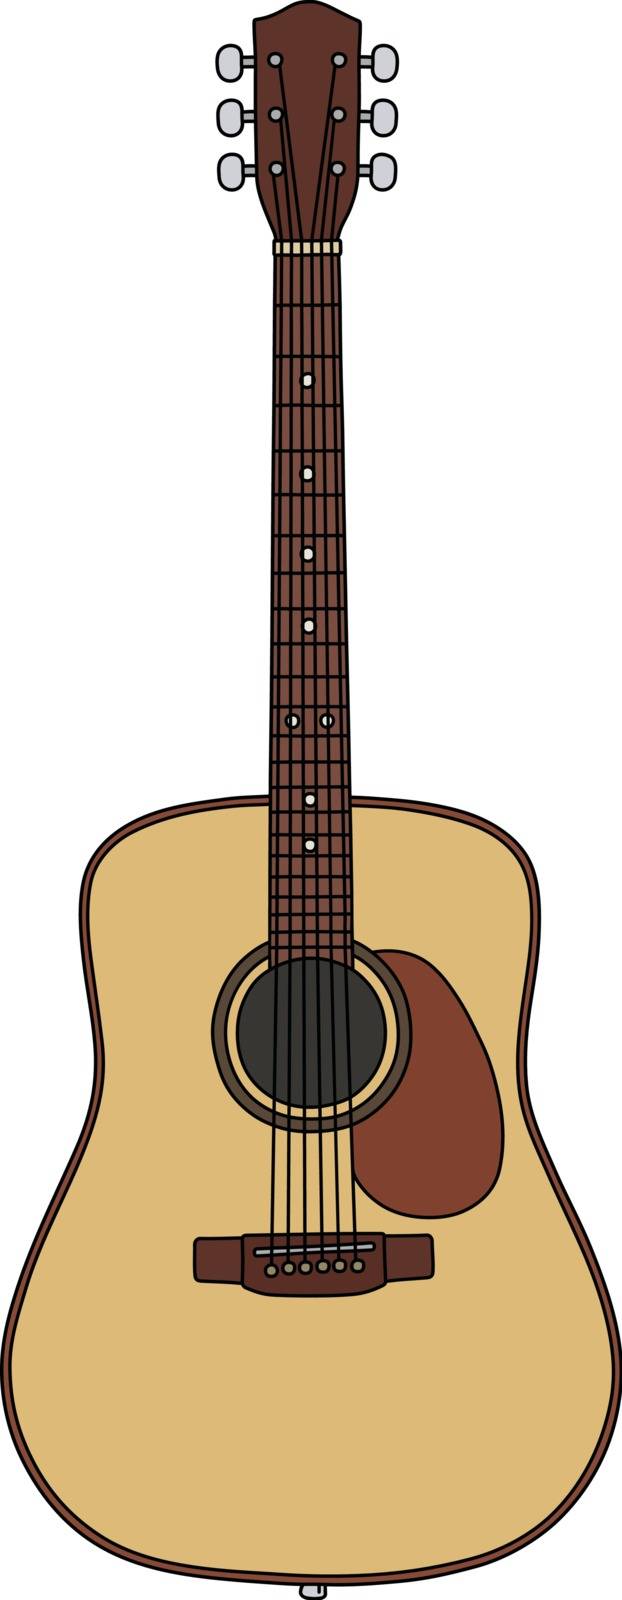 The classic accoustic guitar by vostal